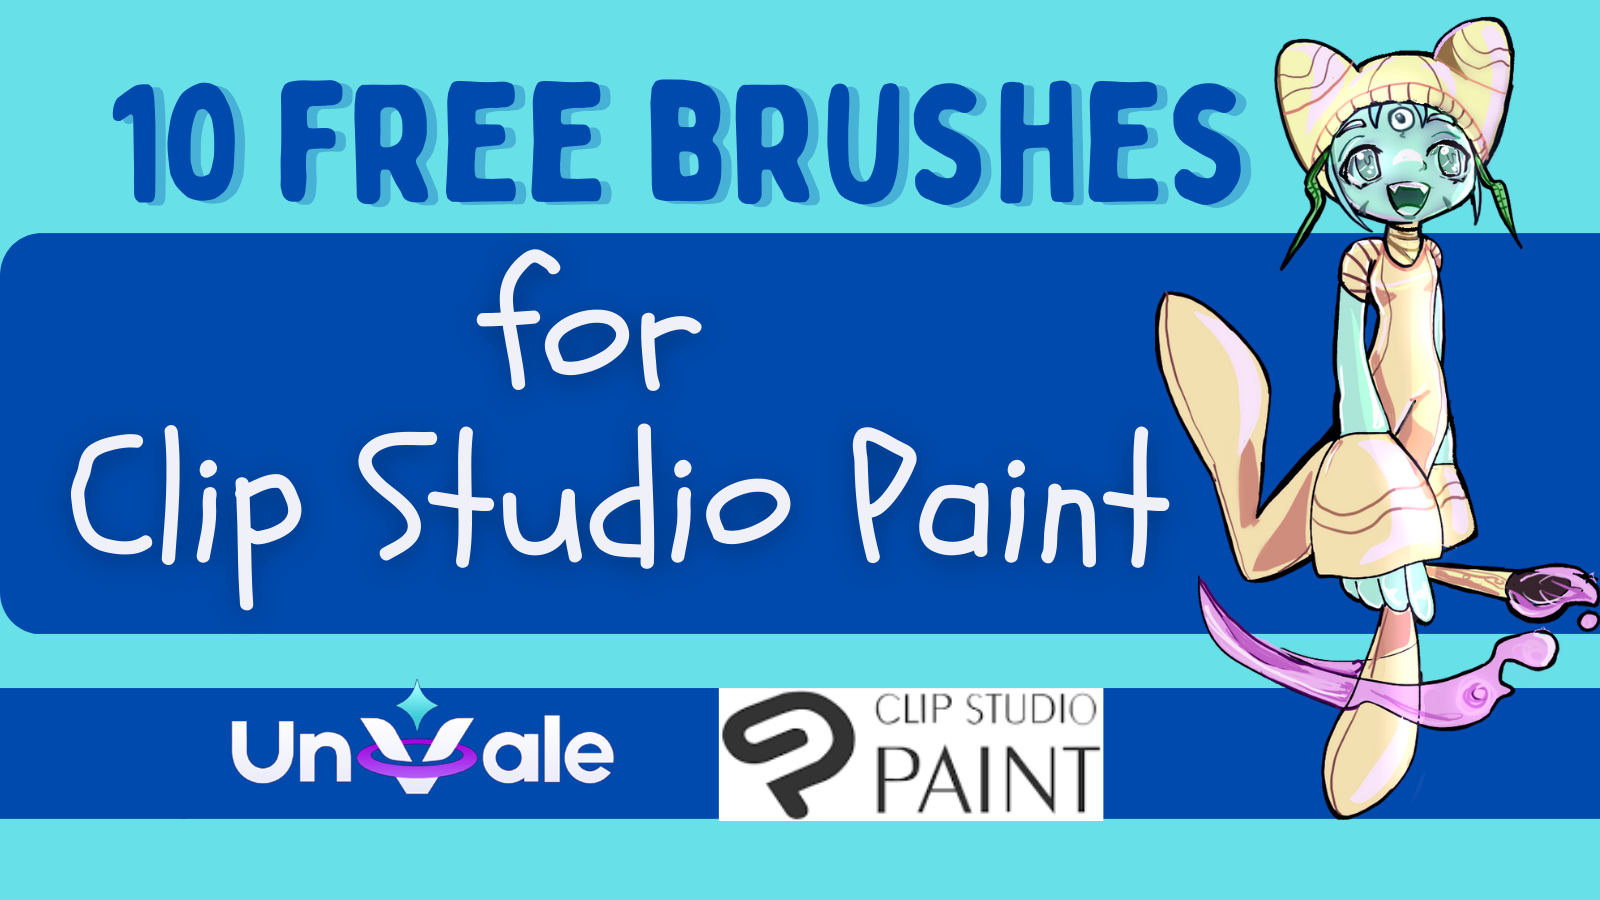 10 Free Brushes for Clip Studio Paint